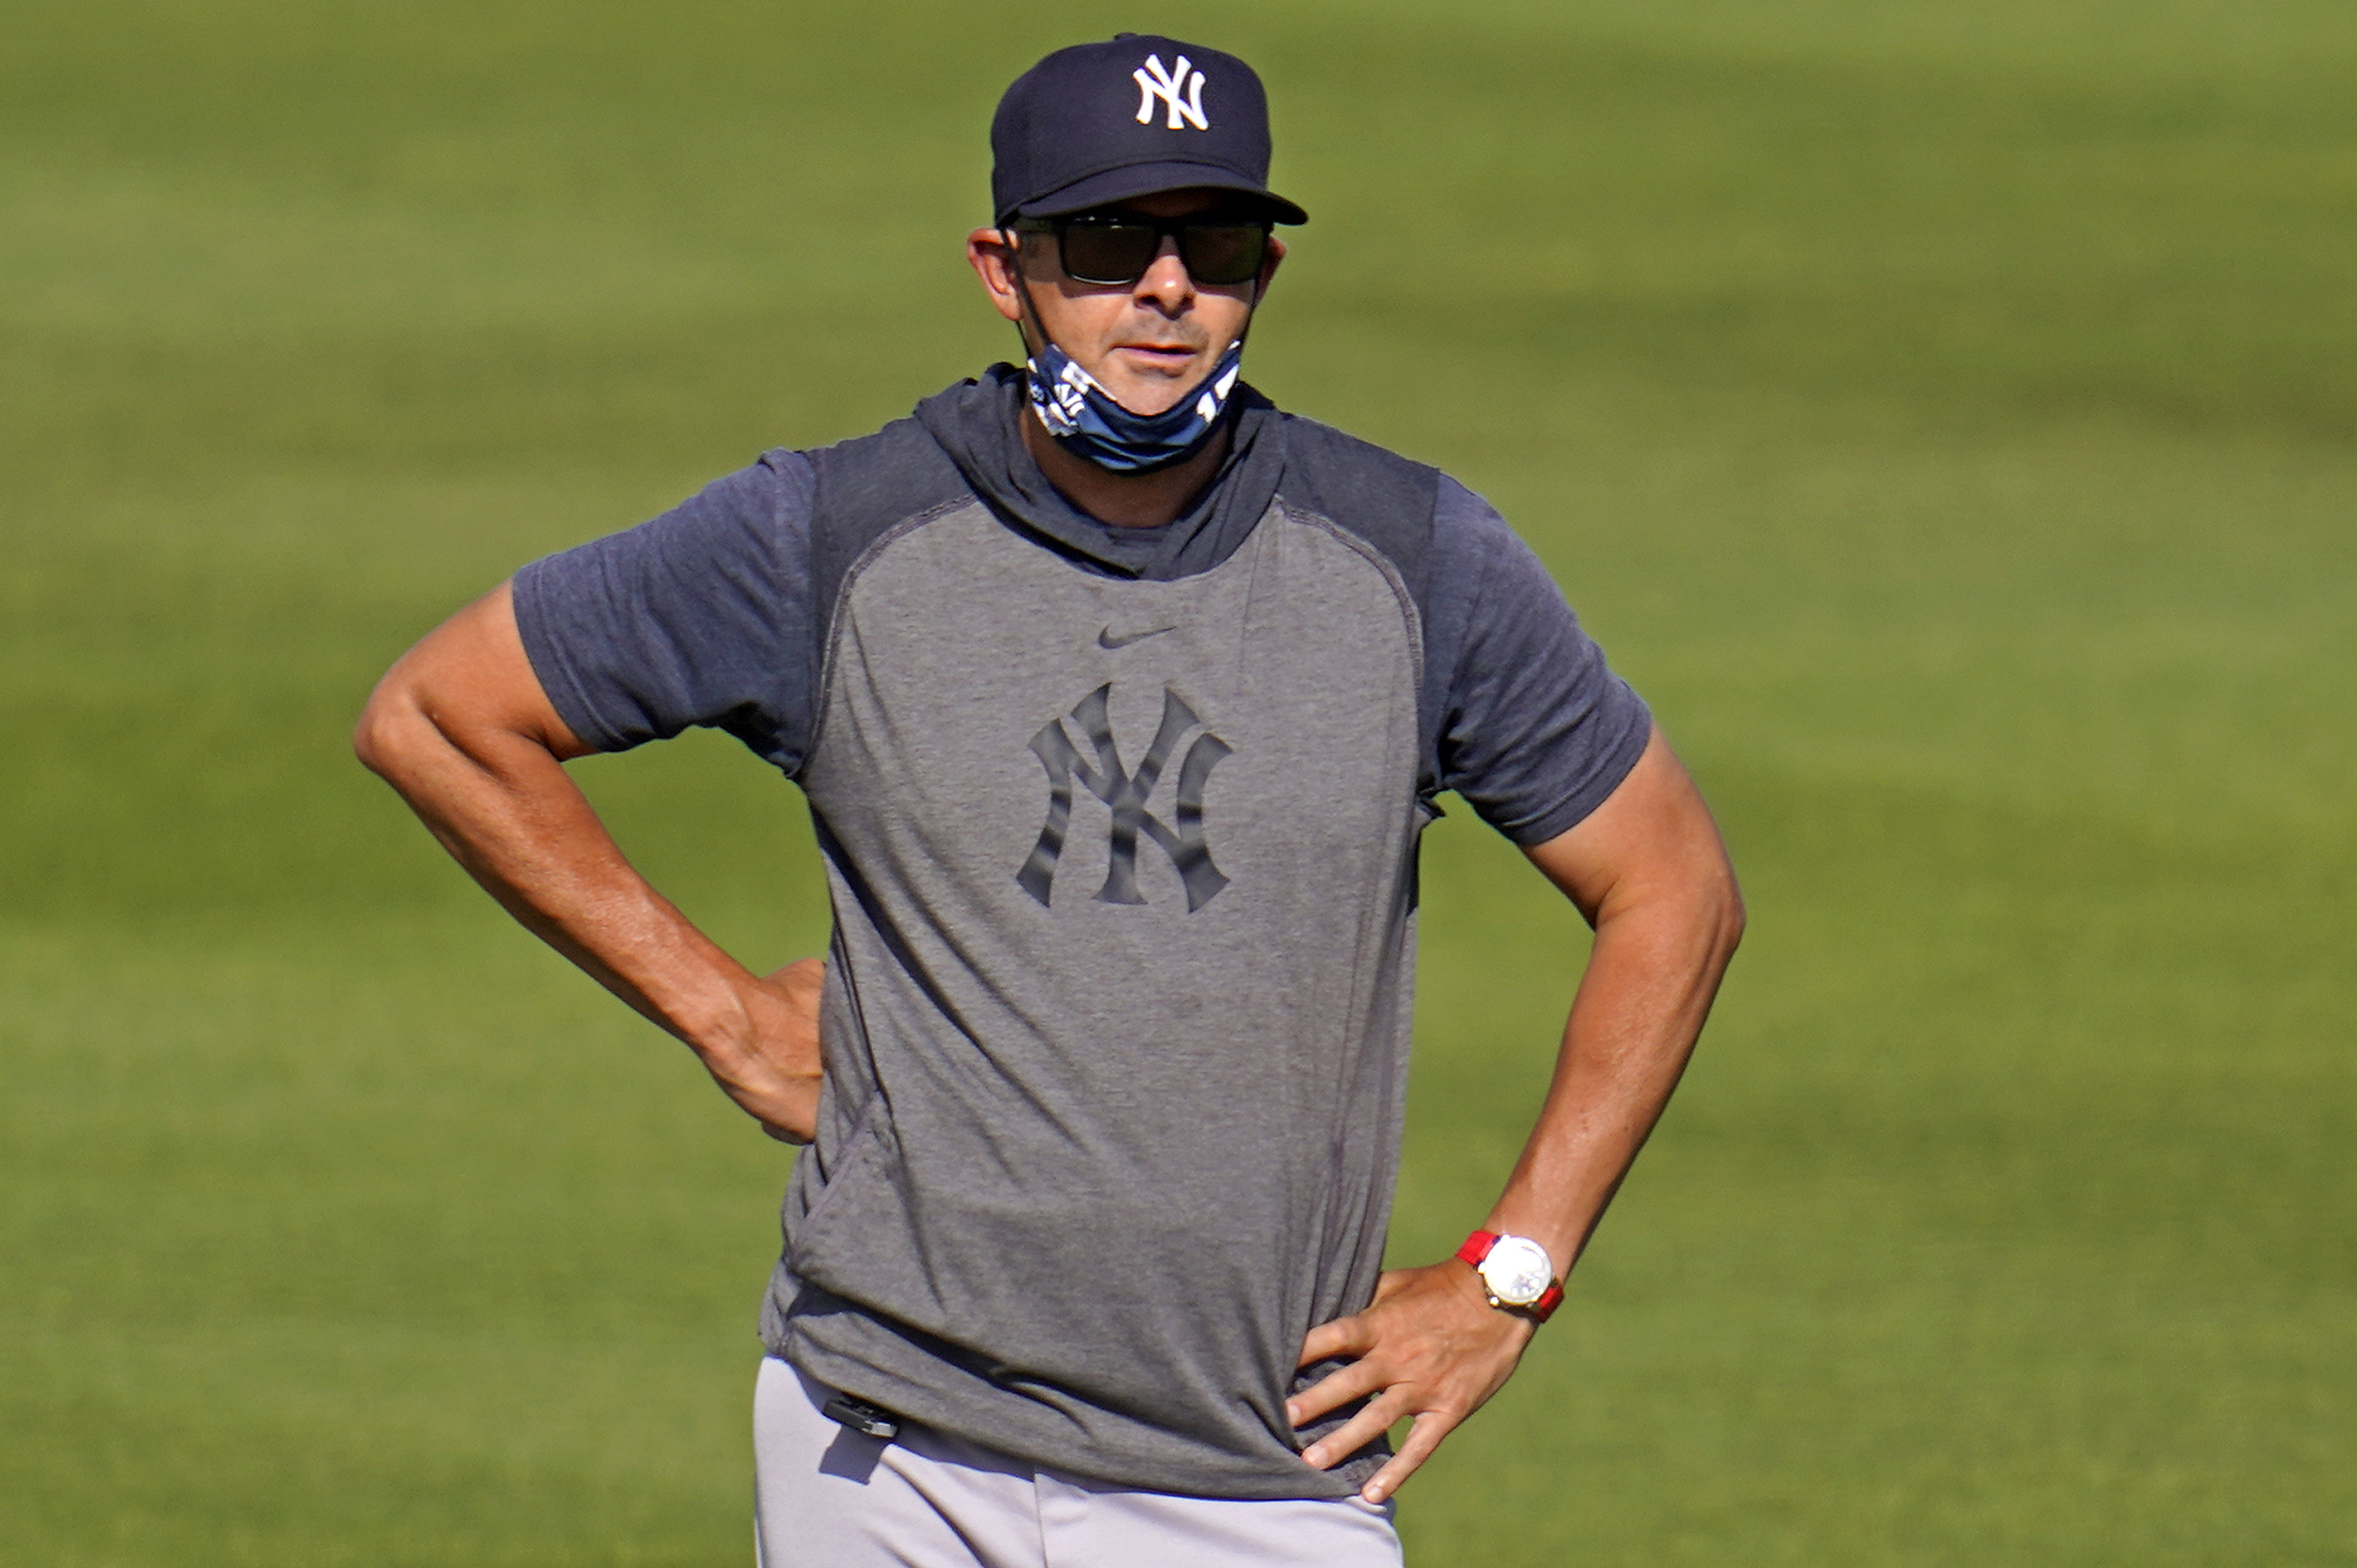 Yankees News: Aaron Boone Signs New 3-Year Contract to Return as